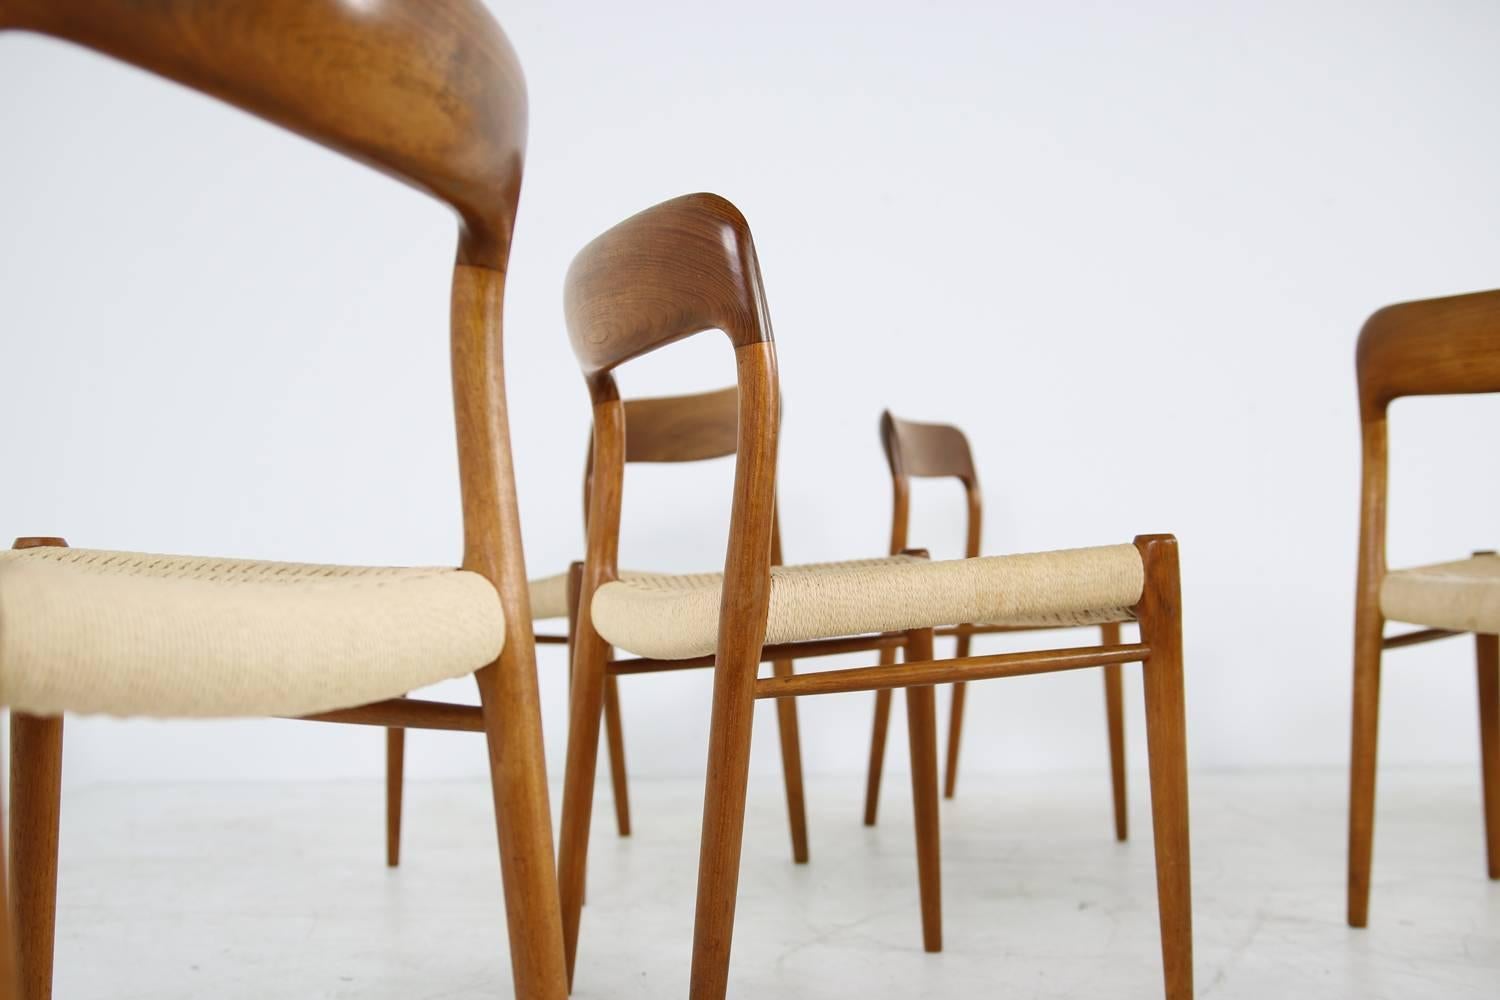 Beautiful set of eight dining chairs, Niels Moller Mod. 75 for J.L. Moller. Very good condition, the Danish paper cord (cane) is great, chairs are solid and the wood has fantastic patina.